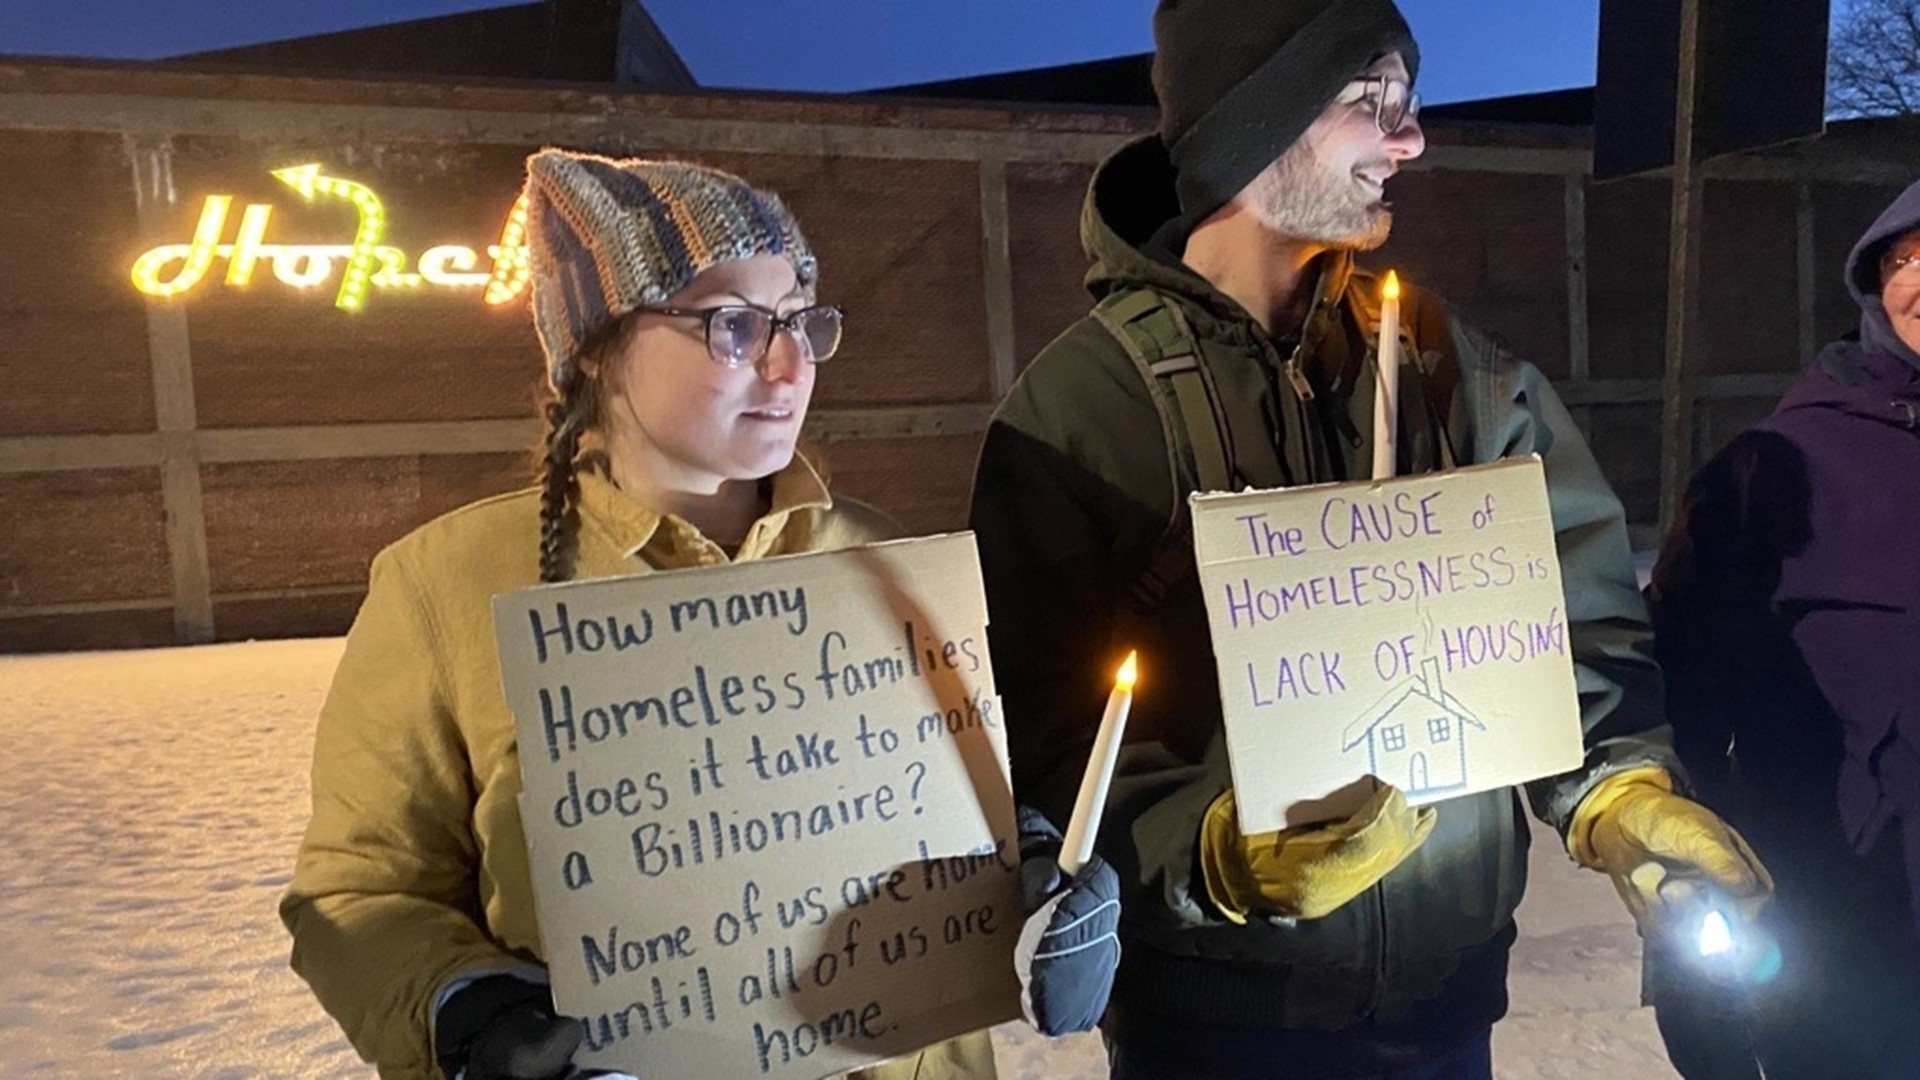 Wednesday's vigil also came in the wake of a new ordinance passed in Lewiston, which places restrictions on where people experiencing homelessness can sleep.